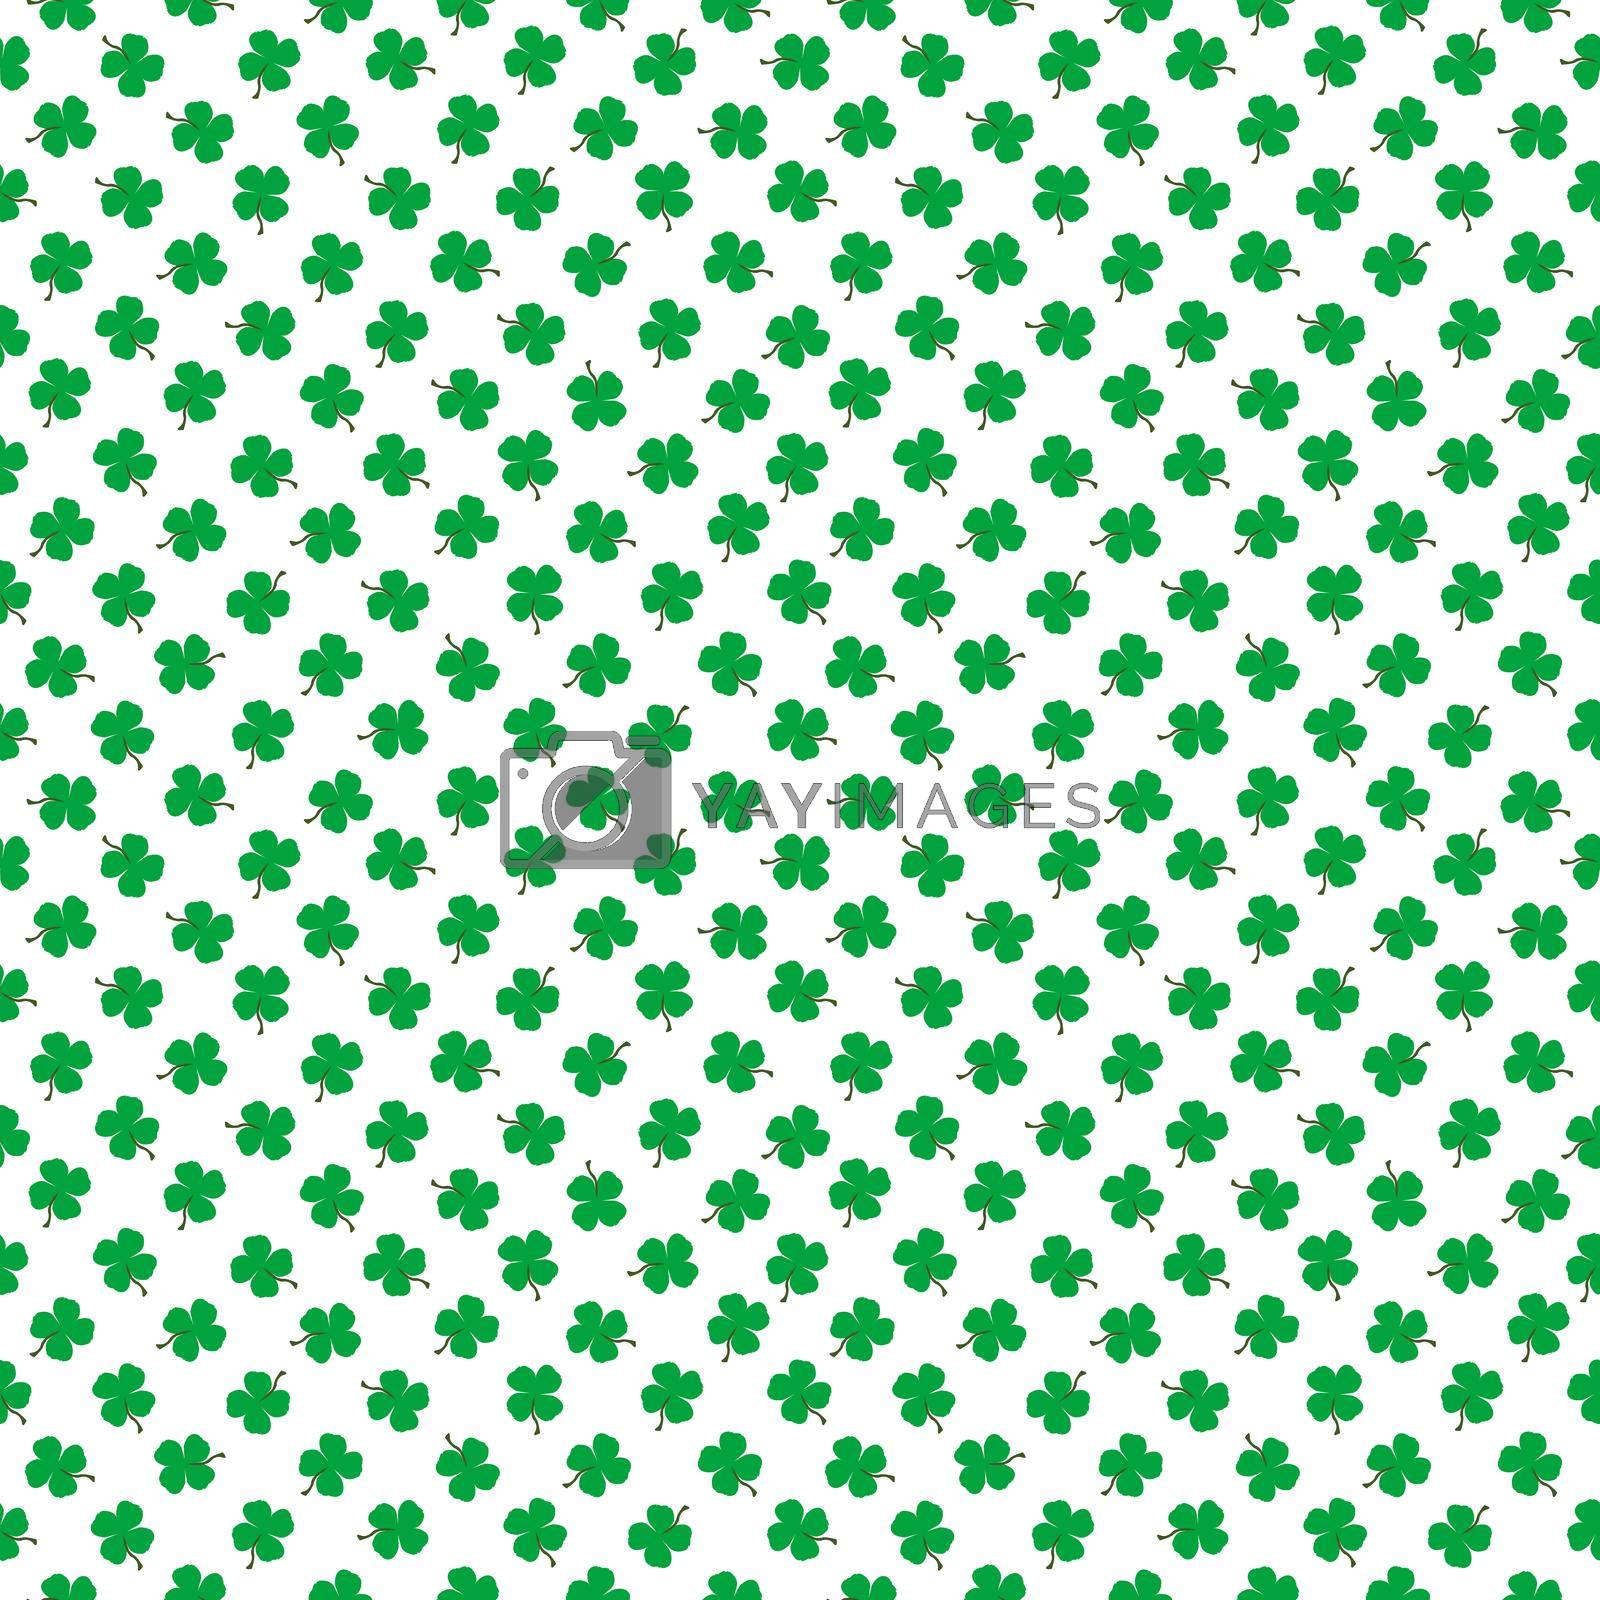 Royalty free image of Seamless pattern with clovers on white background in polka dot style by hibrida13